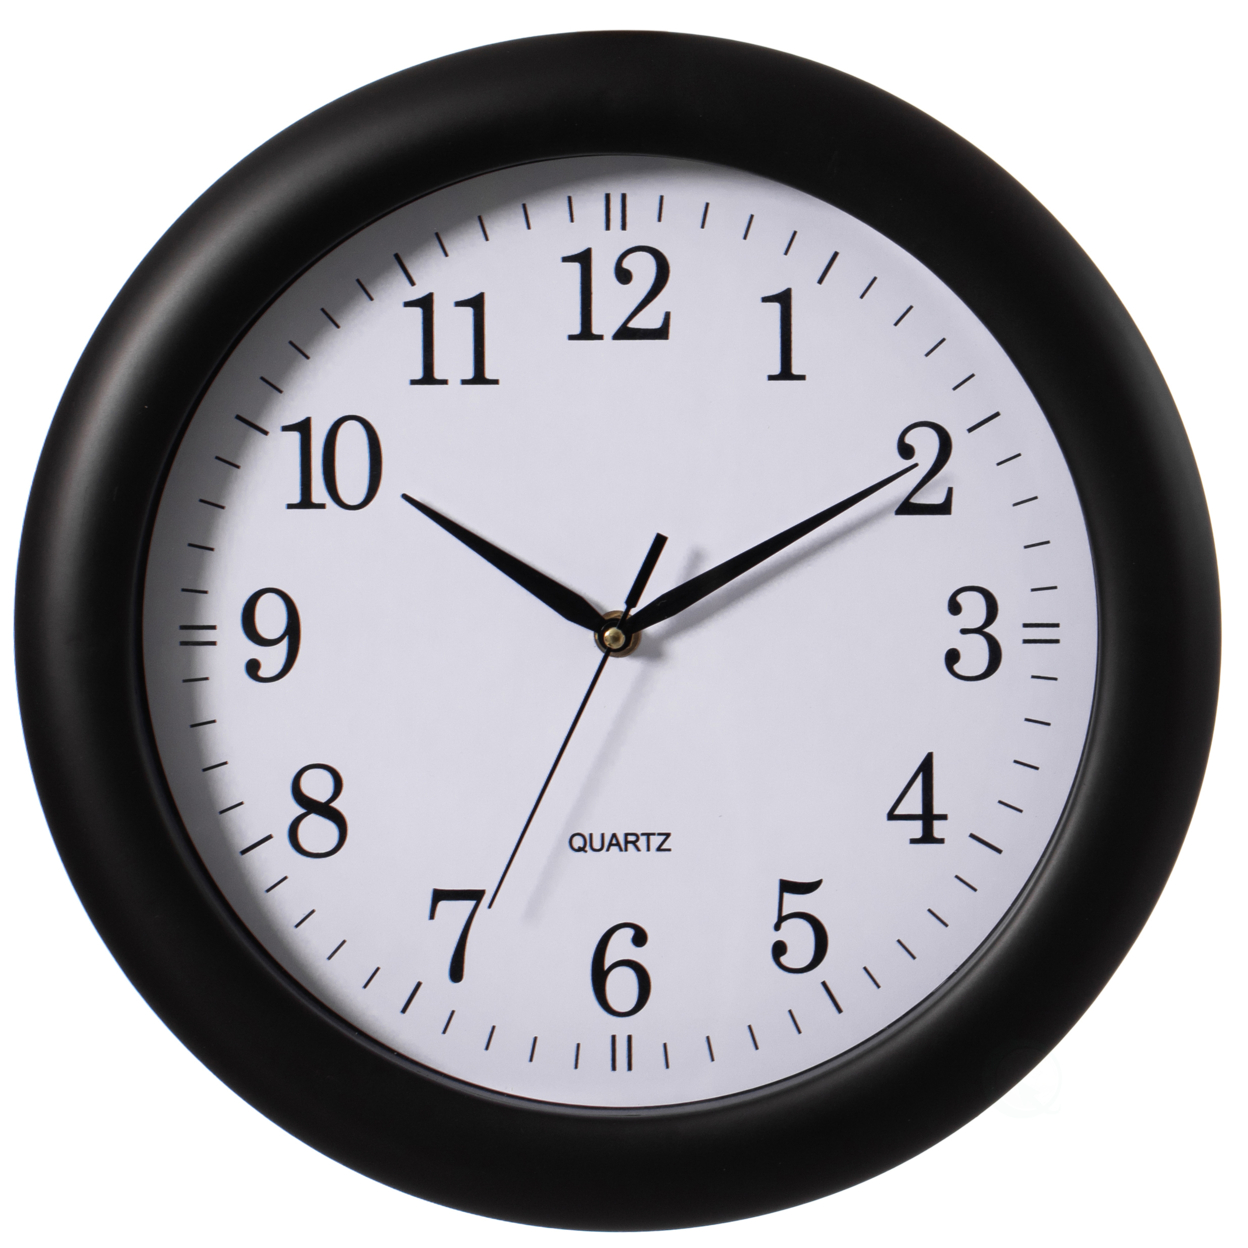 Decorative Classic Round Wall Clock For Living Room, Kitchen, Dining Room, Plastic - Black